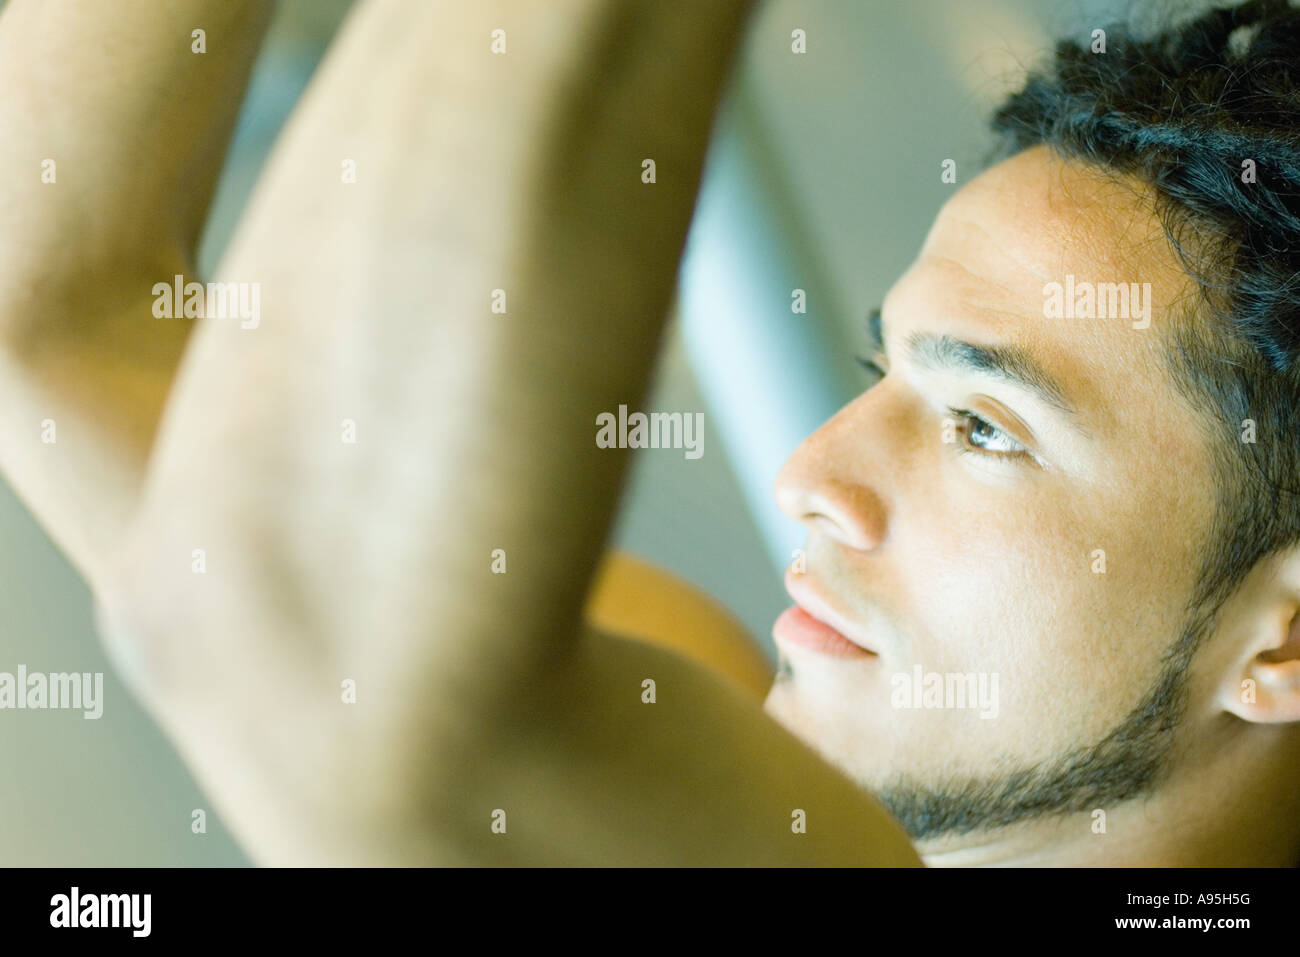 Man lifting weights, close-up, side view Stock Photo